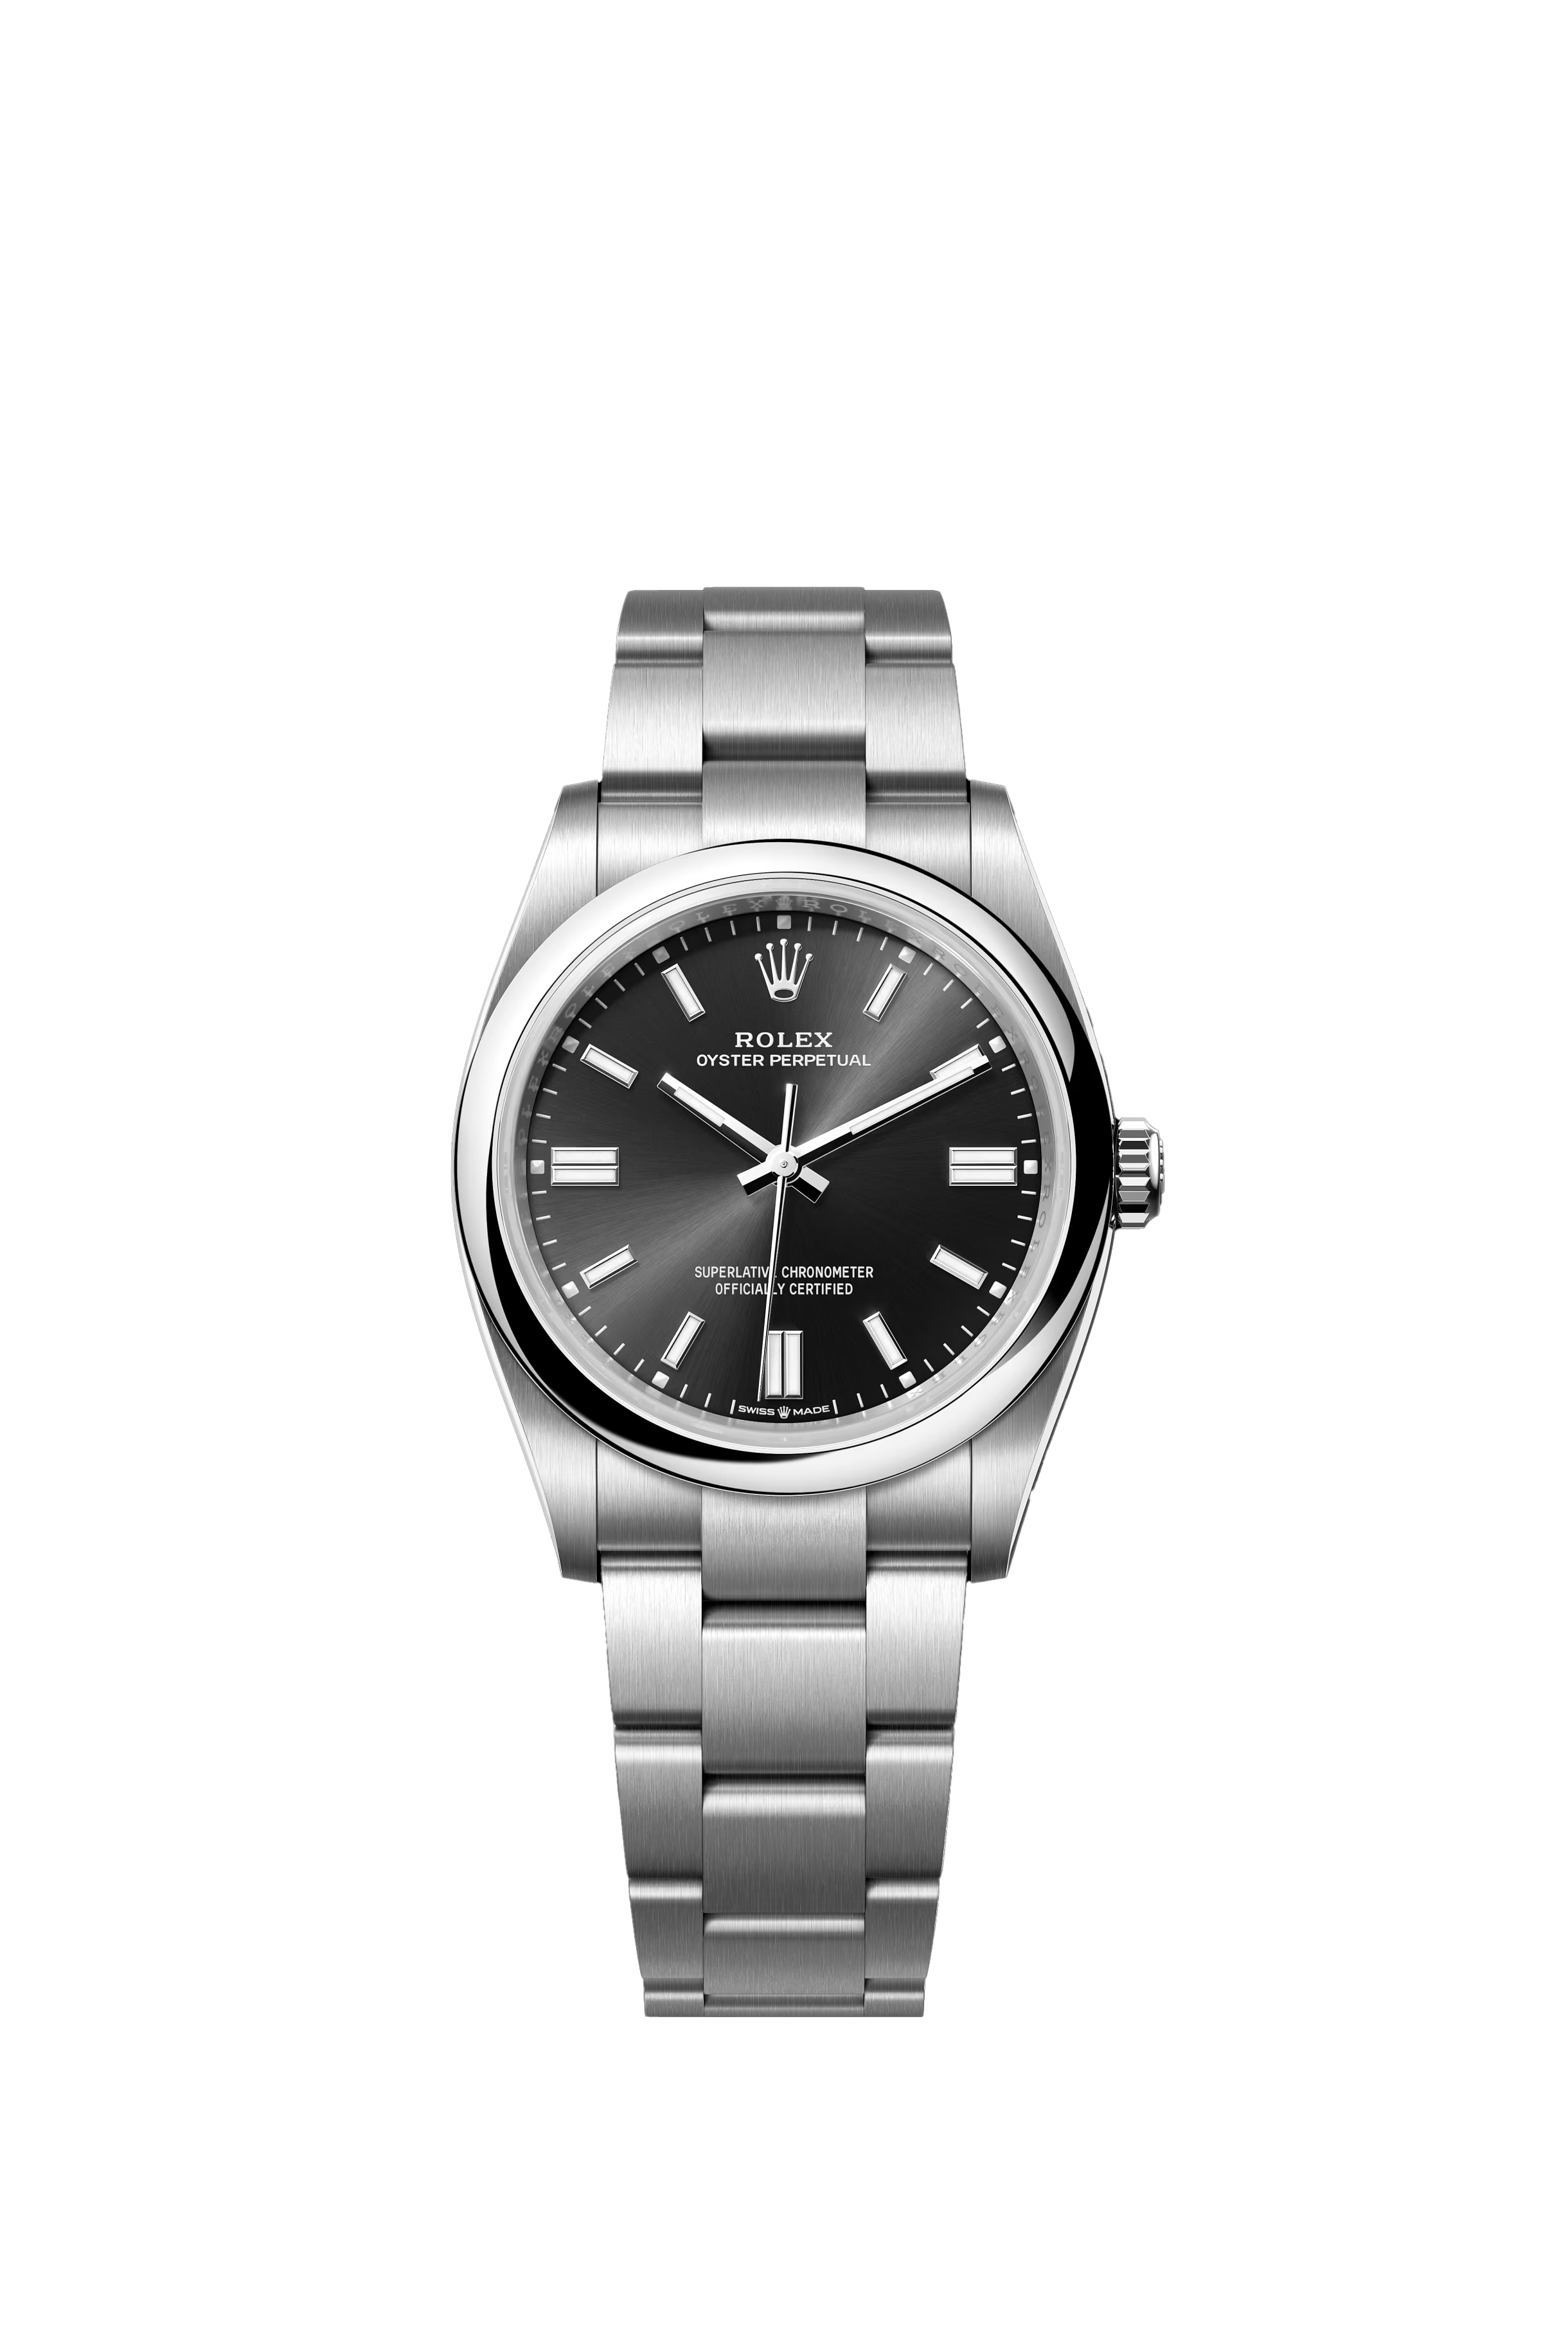 Rolex Oyster Perpetual 36 Oyster, 36 mm, Oystersteel Reference 126000